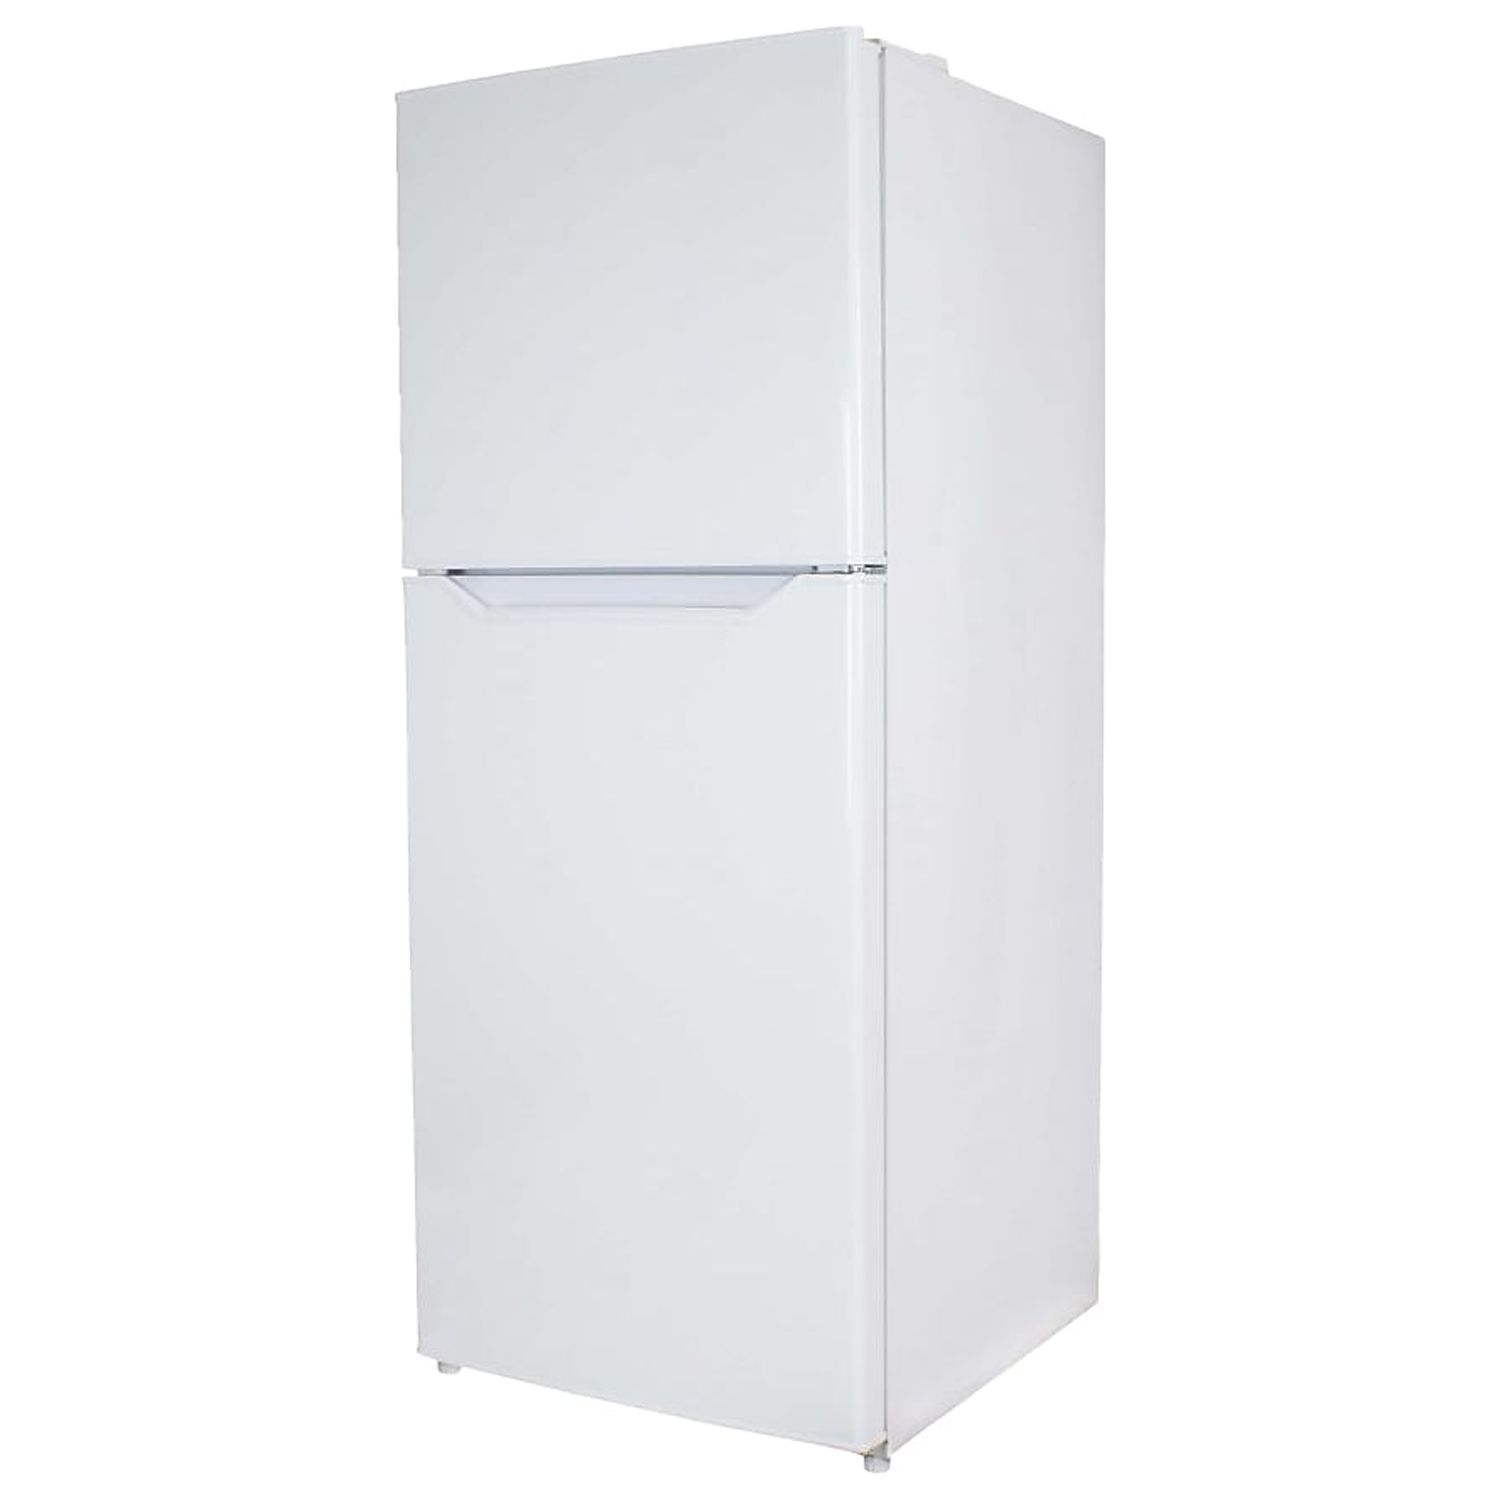 Danby 10.1 cu. ft. Apartment Size Refrigerator, White - image 4 of 9